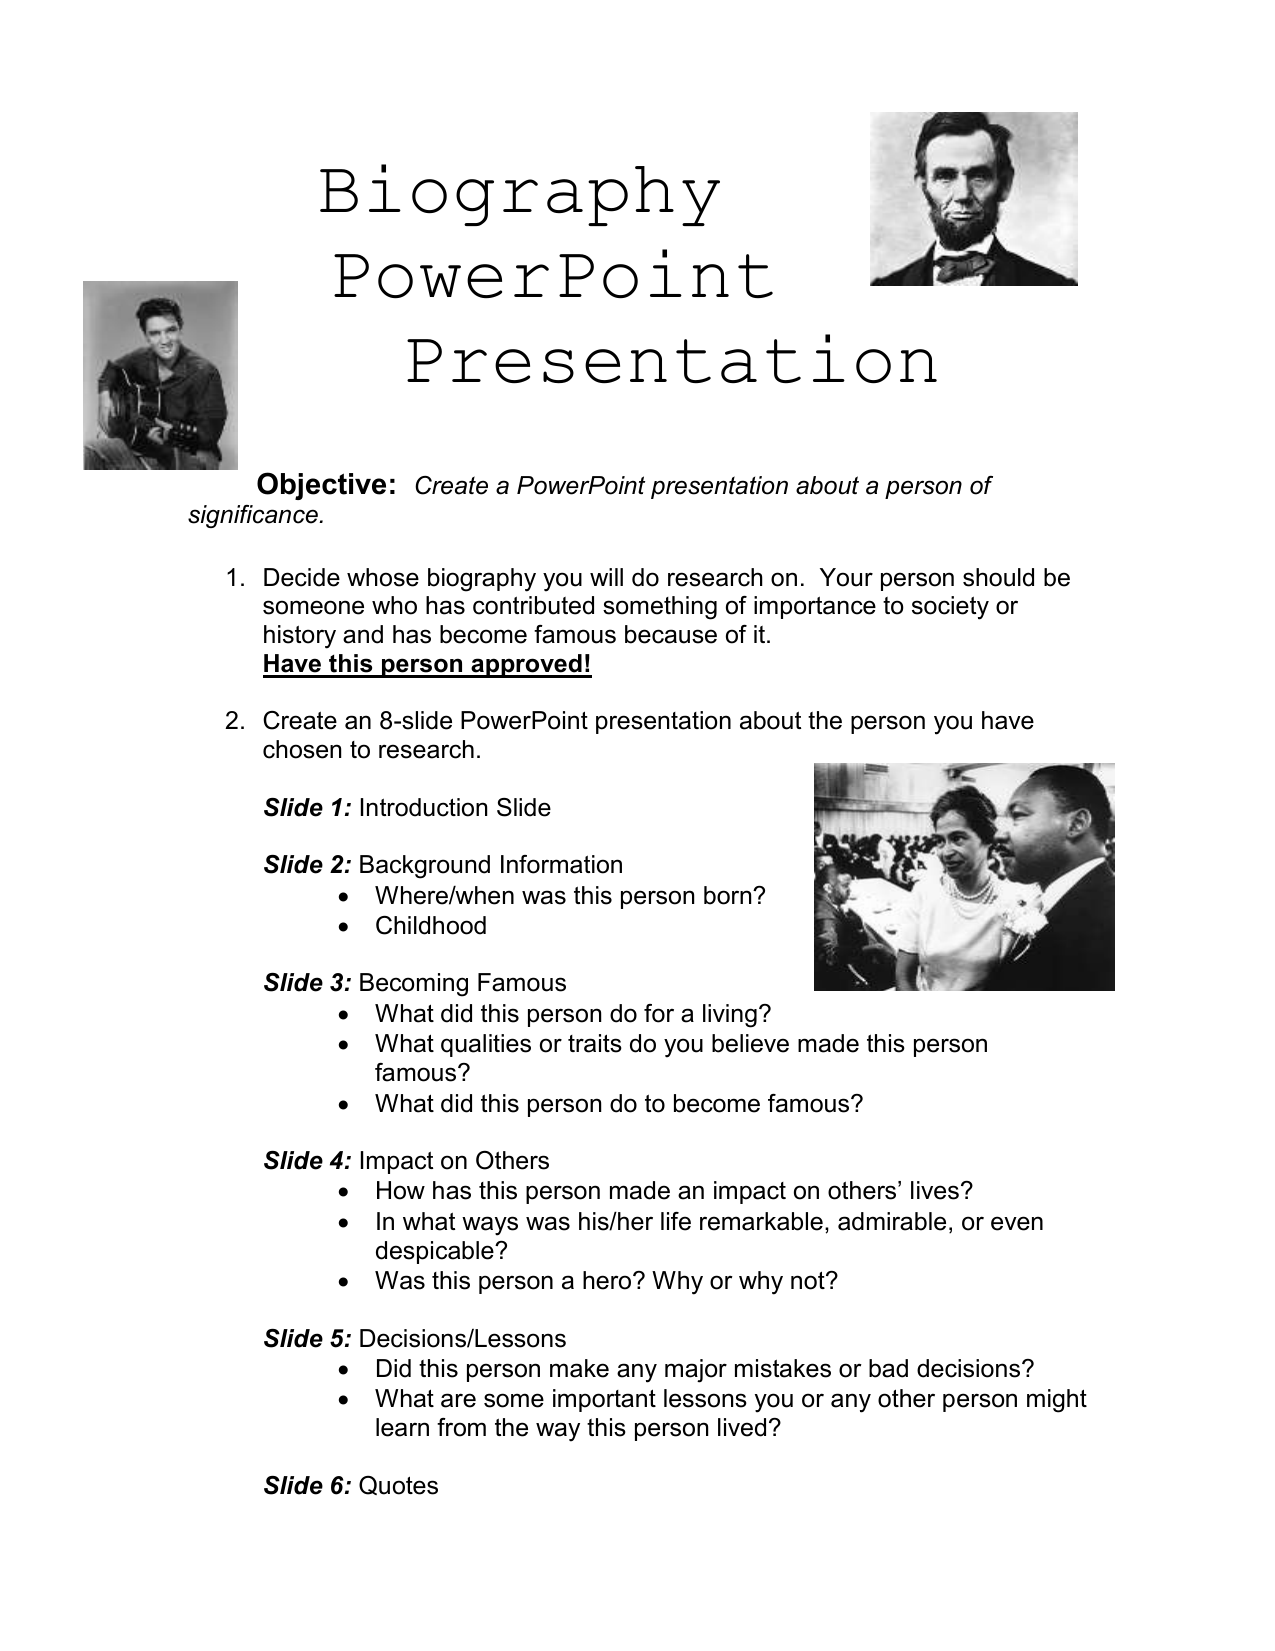 how to make a research powerpoint presentation